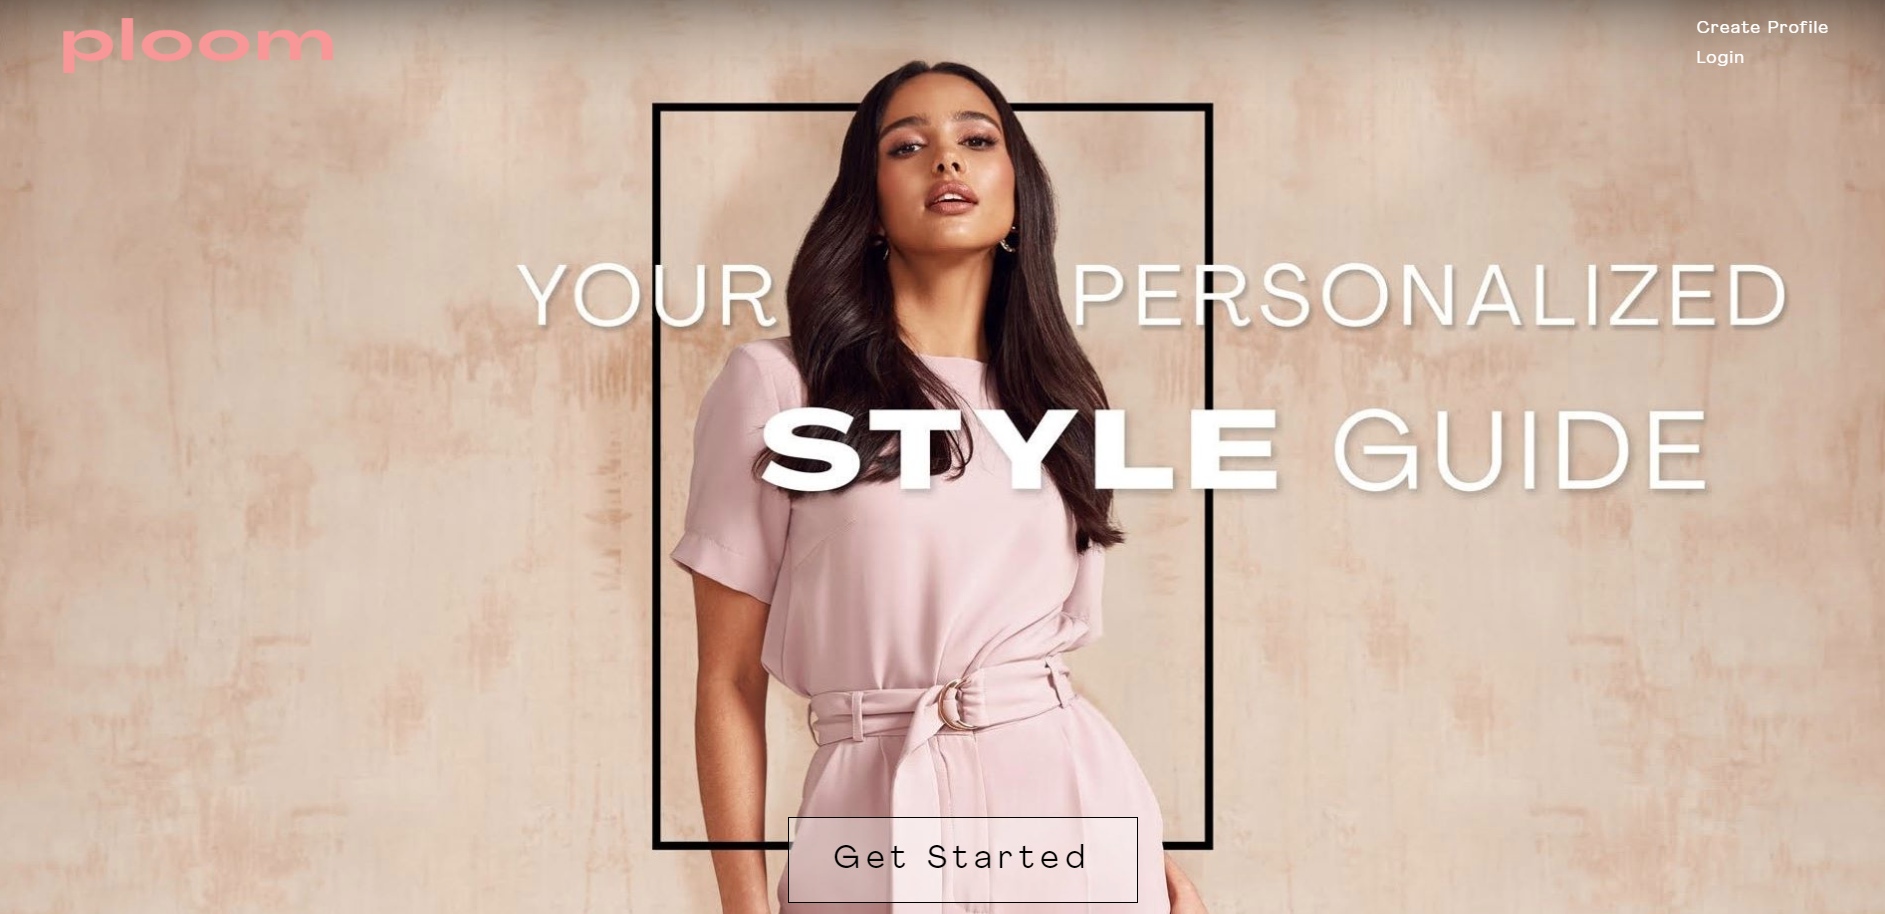 Landing page of a website for a for fashion retail. The center of the page has a strong conjfident female model wearing a pink outfit with a matching sash belt.